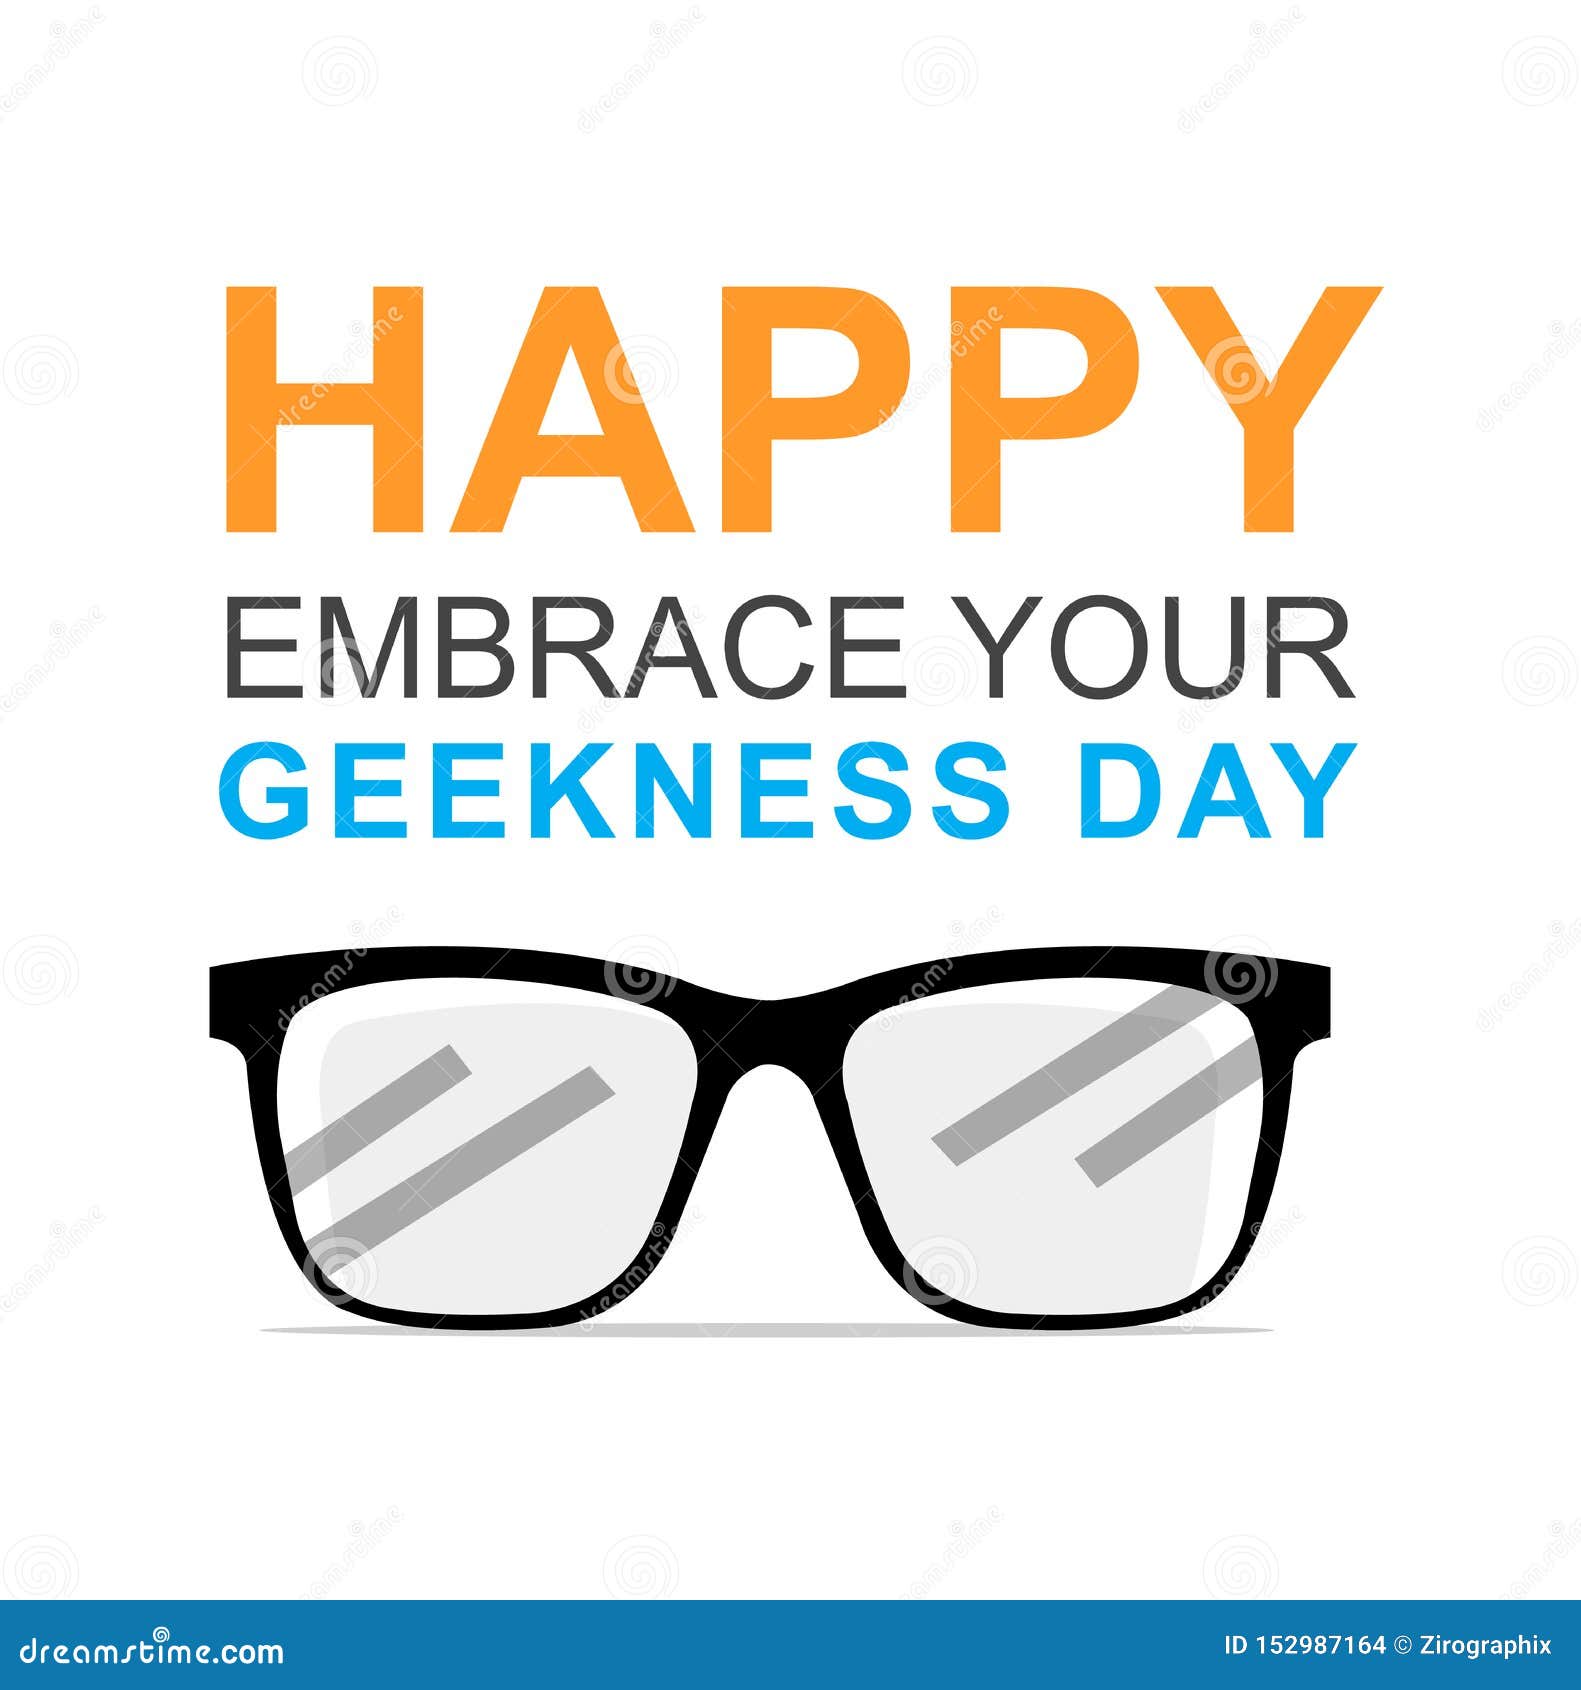 Happy Embrace Your Geekness Day Stock Photo Image of freaks, geekness